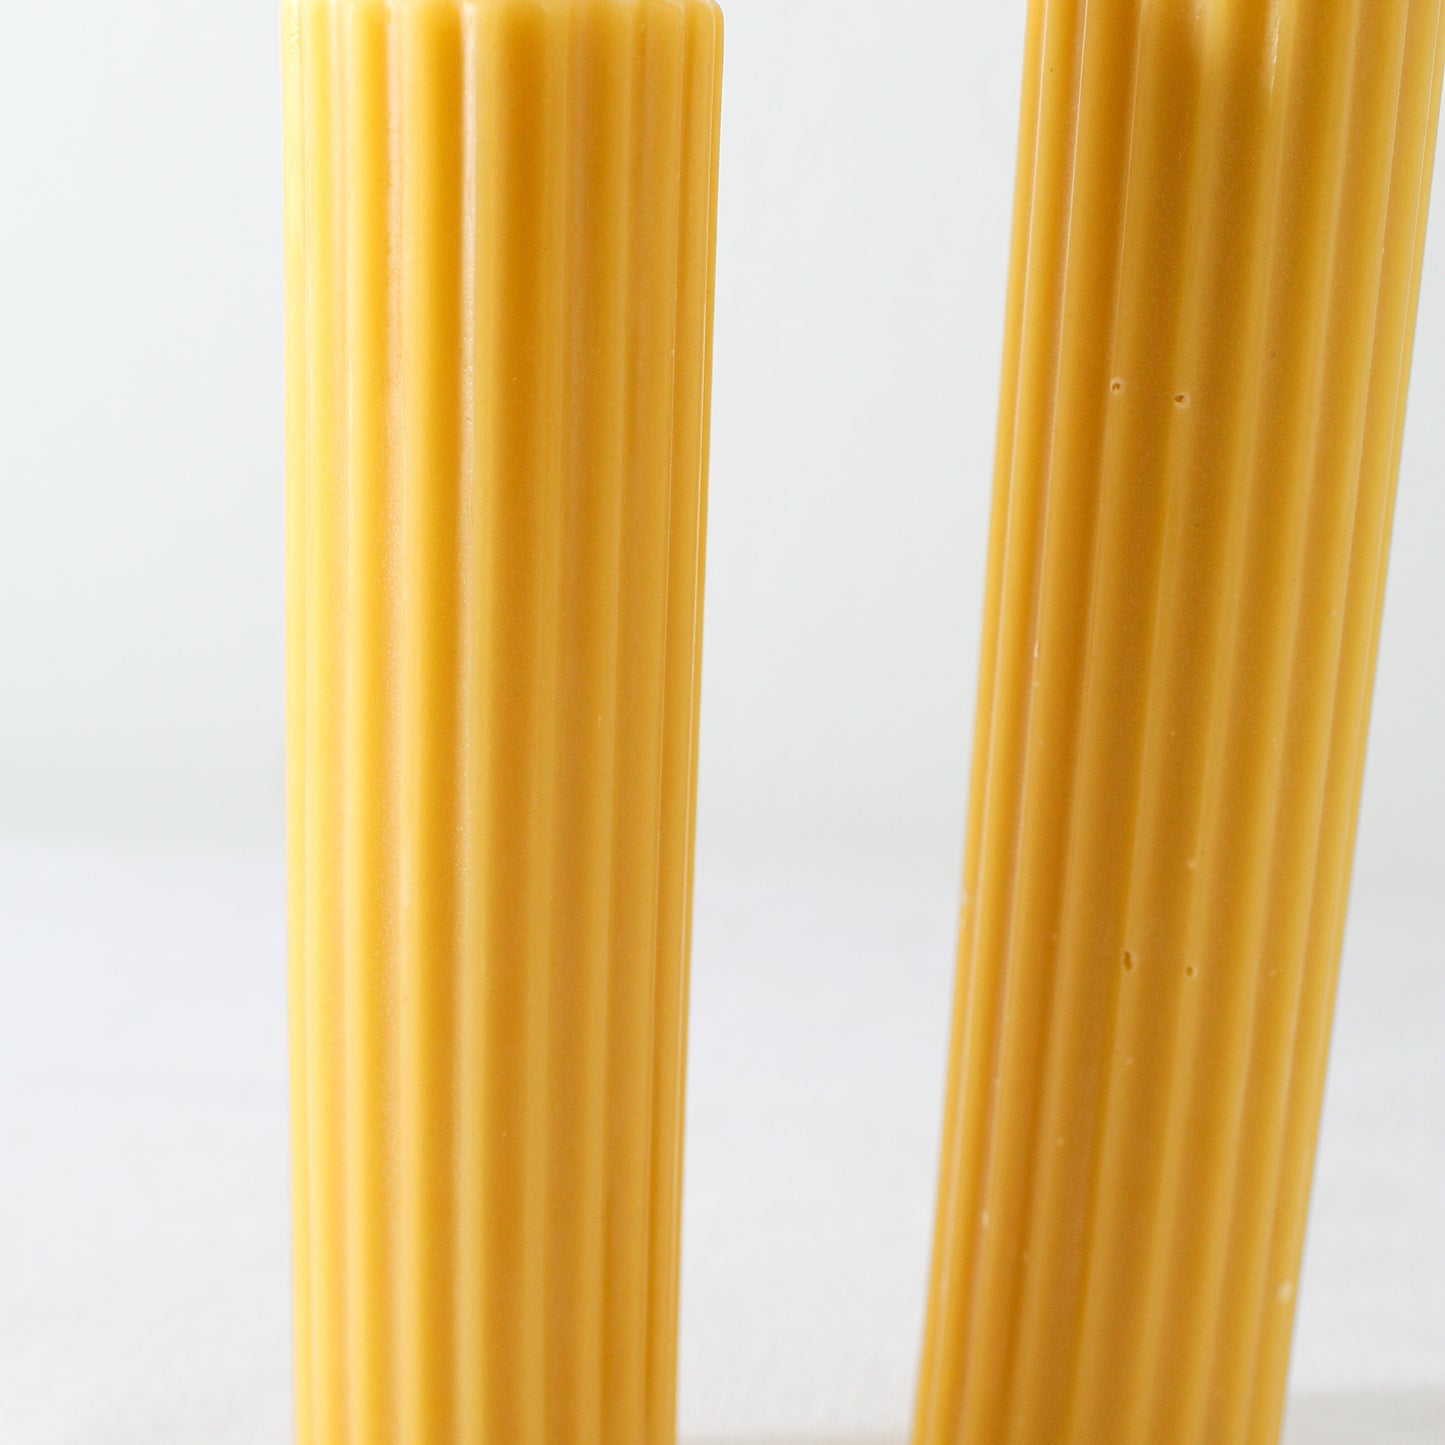 Basic Ones Cyclinder Beeswax Candles